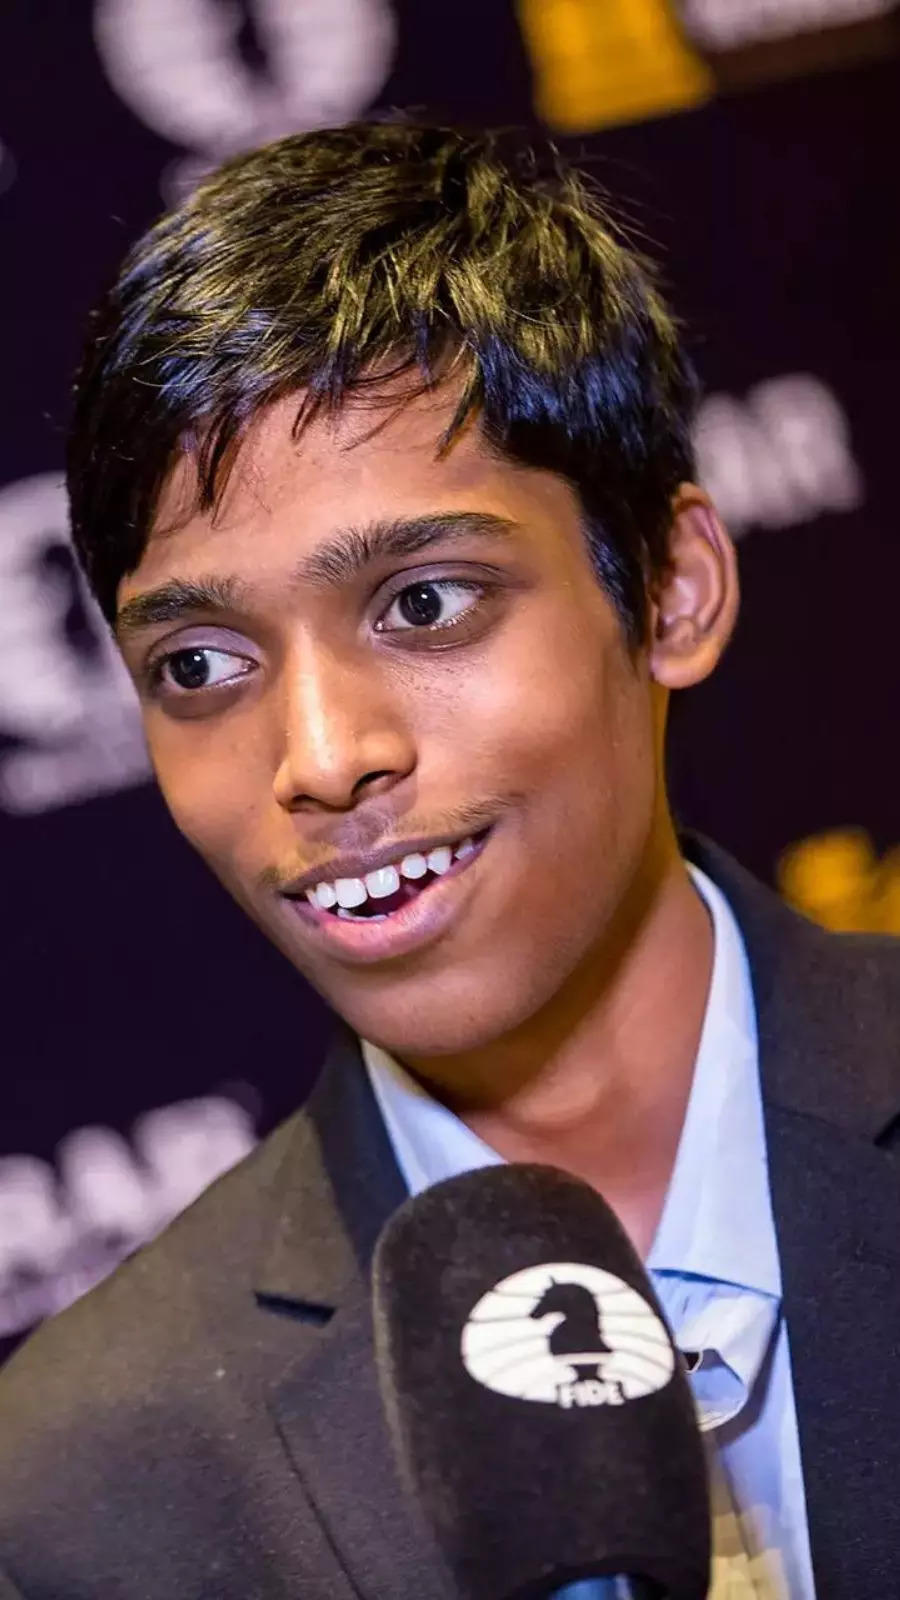 How much prize money has R Praggnanandhaa won after being the